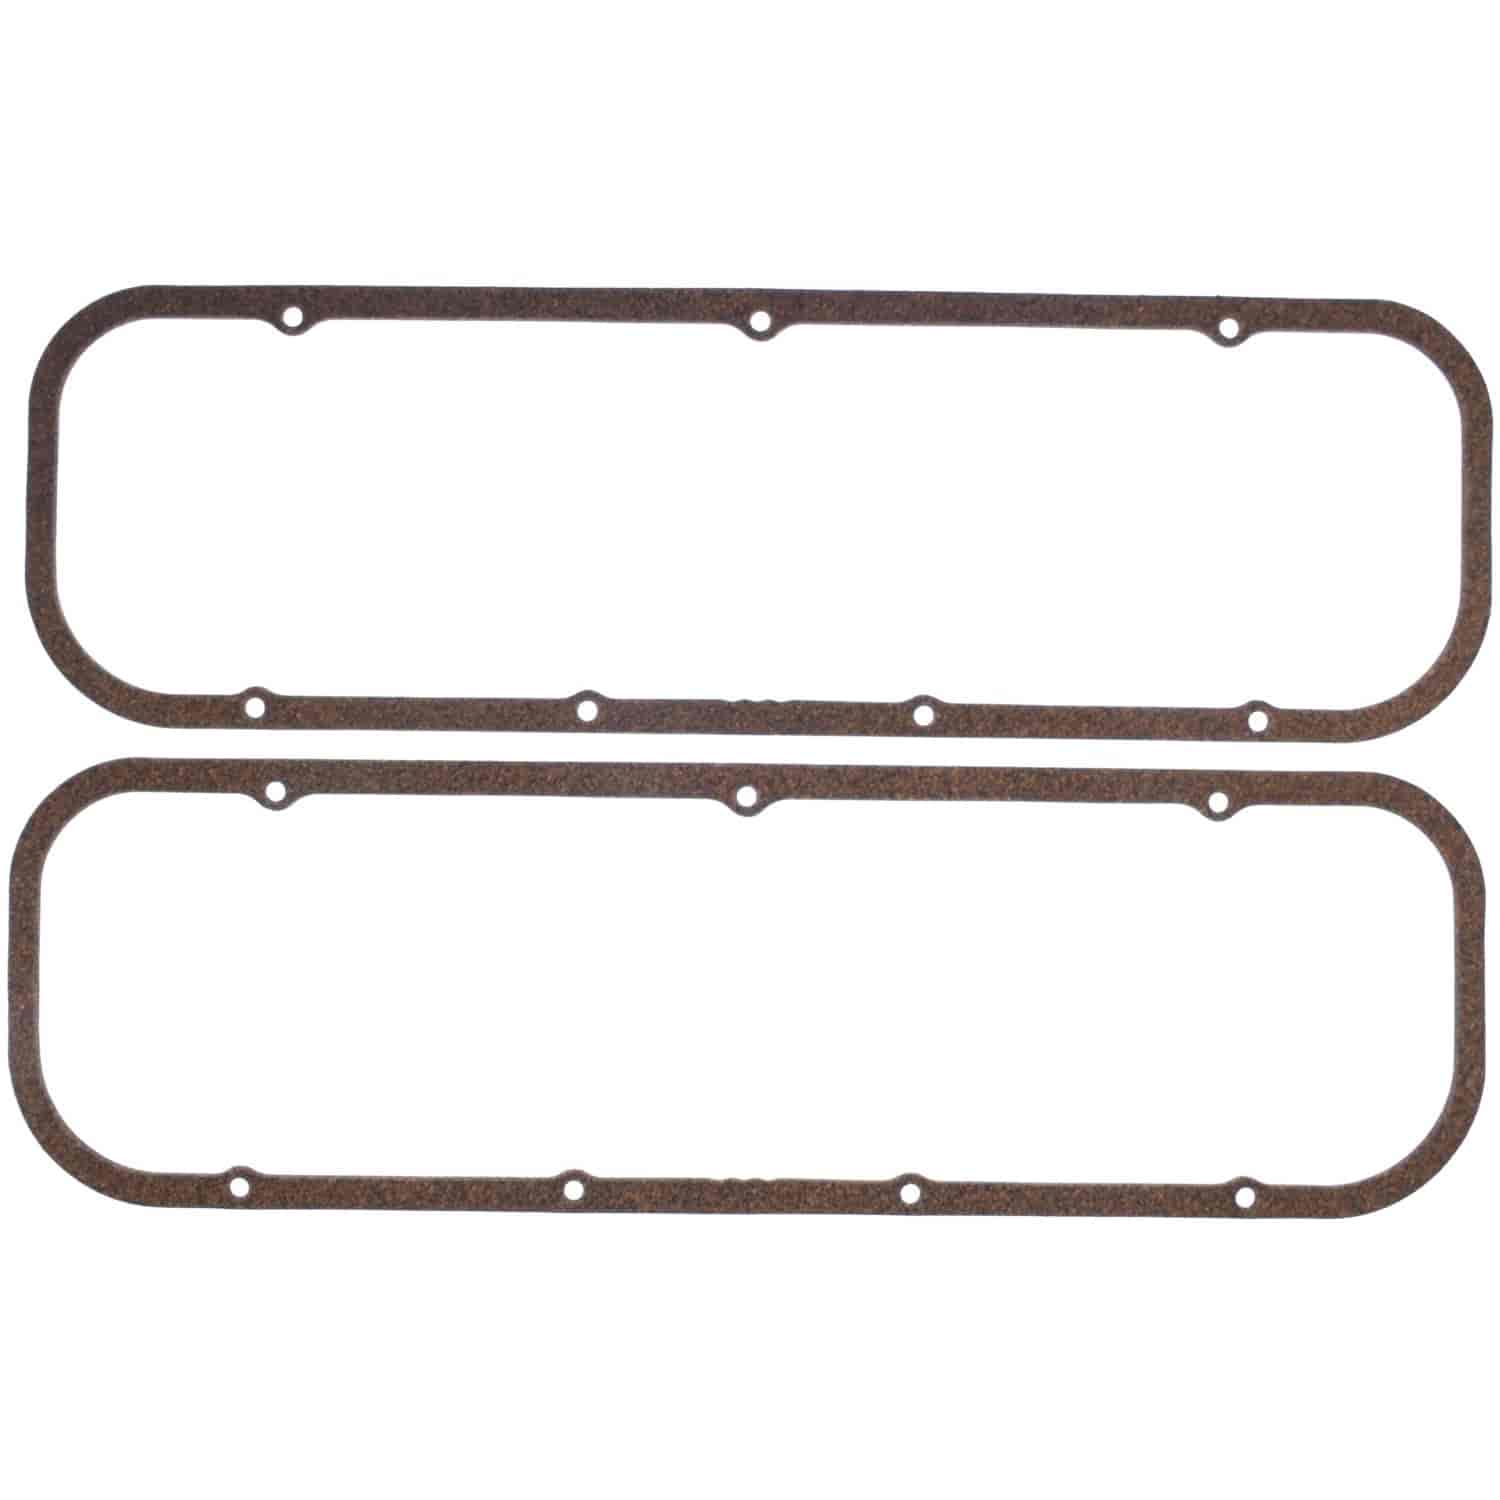 Valve Cover Gasket Set 1965-1985 Big Block Chevy 396/402/427/454 in Cork with Metal Carrier